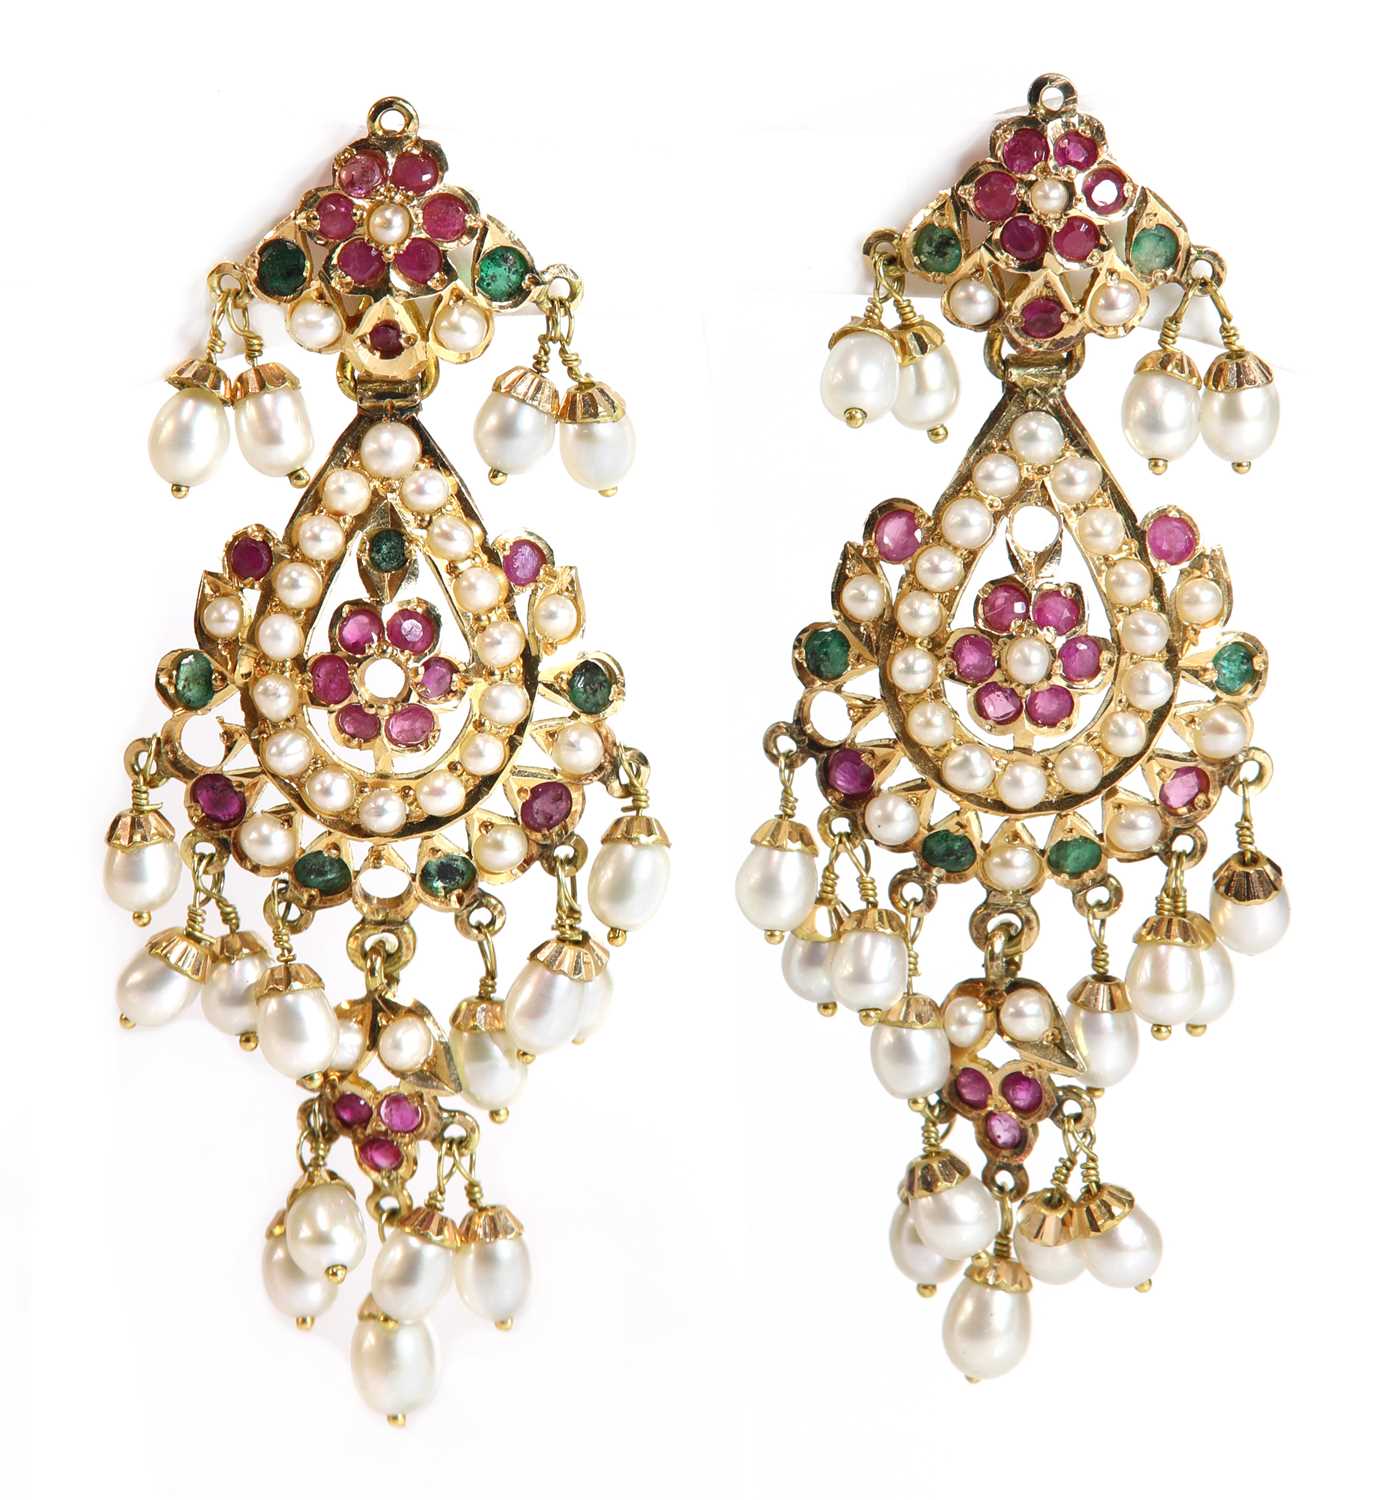 Lot 160 - A pair of Indian high carat gold cultured freshwater pearl, ruby and emerald drop earrings